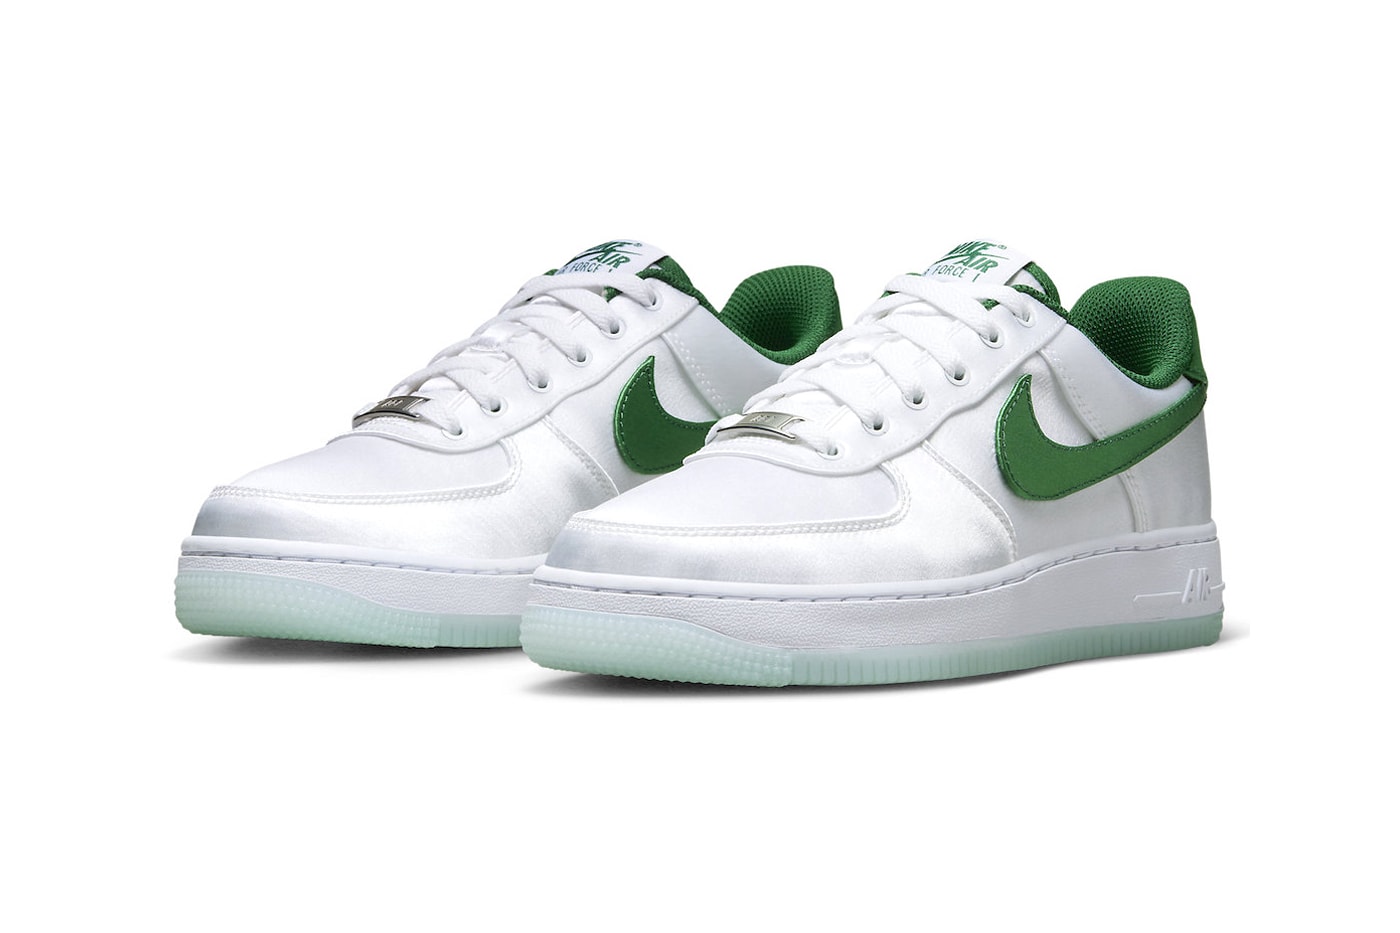 Nike Air Force 1 Low "Satin" White/Green DX6541-101 Release staple white sneakers summer shoes af1